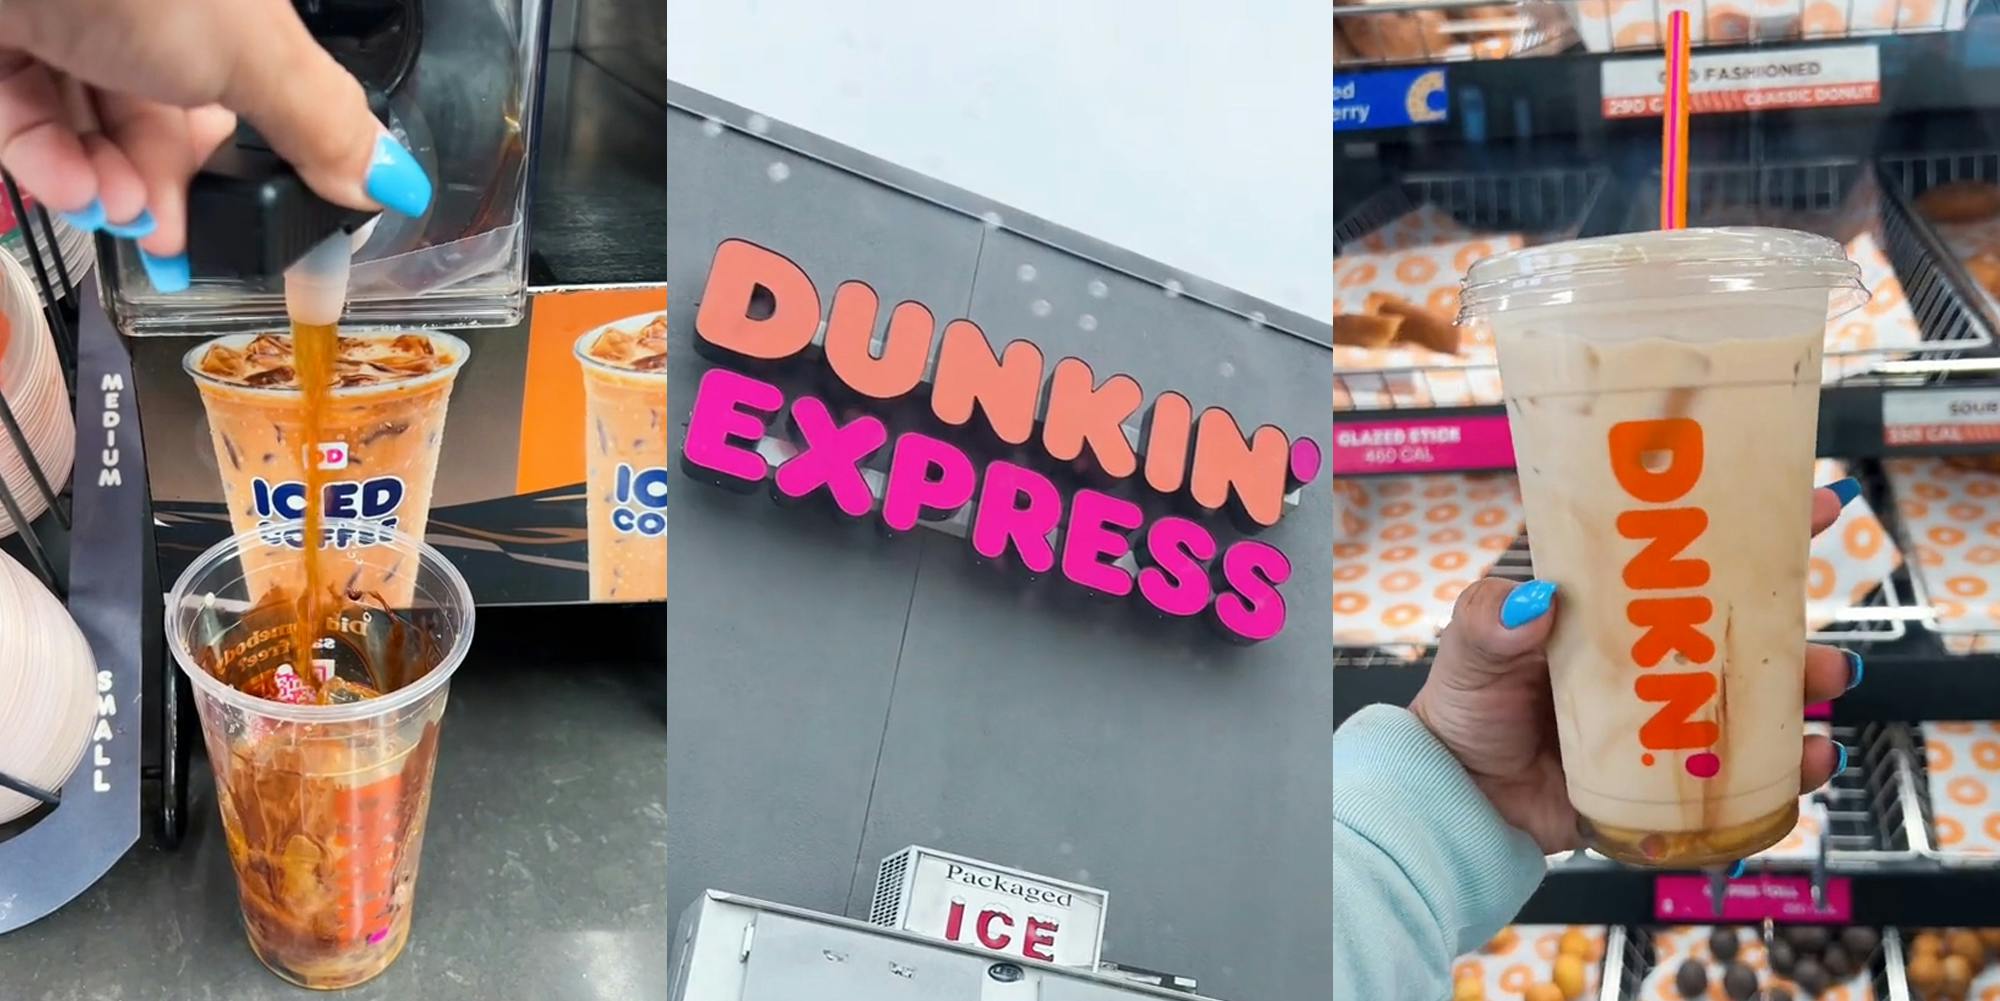 person making coffee in Dunkin' Express (l) Dunkin' Express sign on building (c) Dunkin' drink in hand in front of donuts (r)